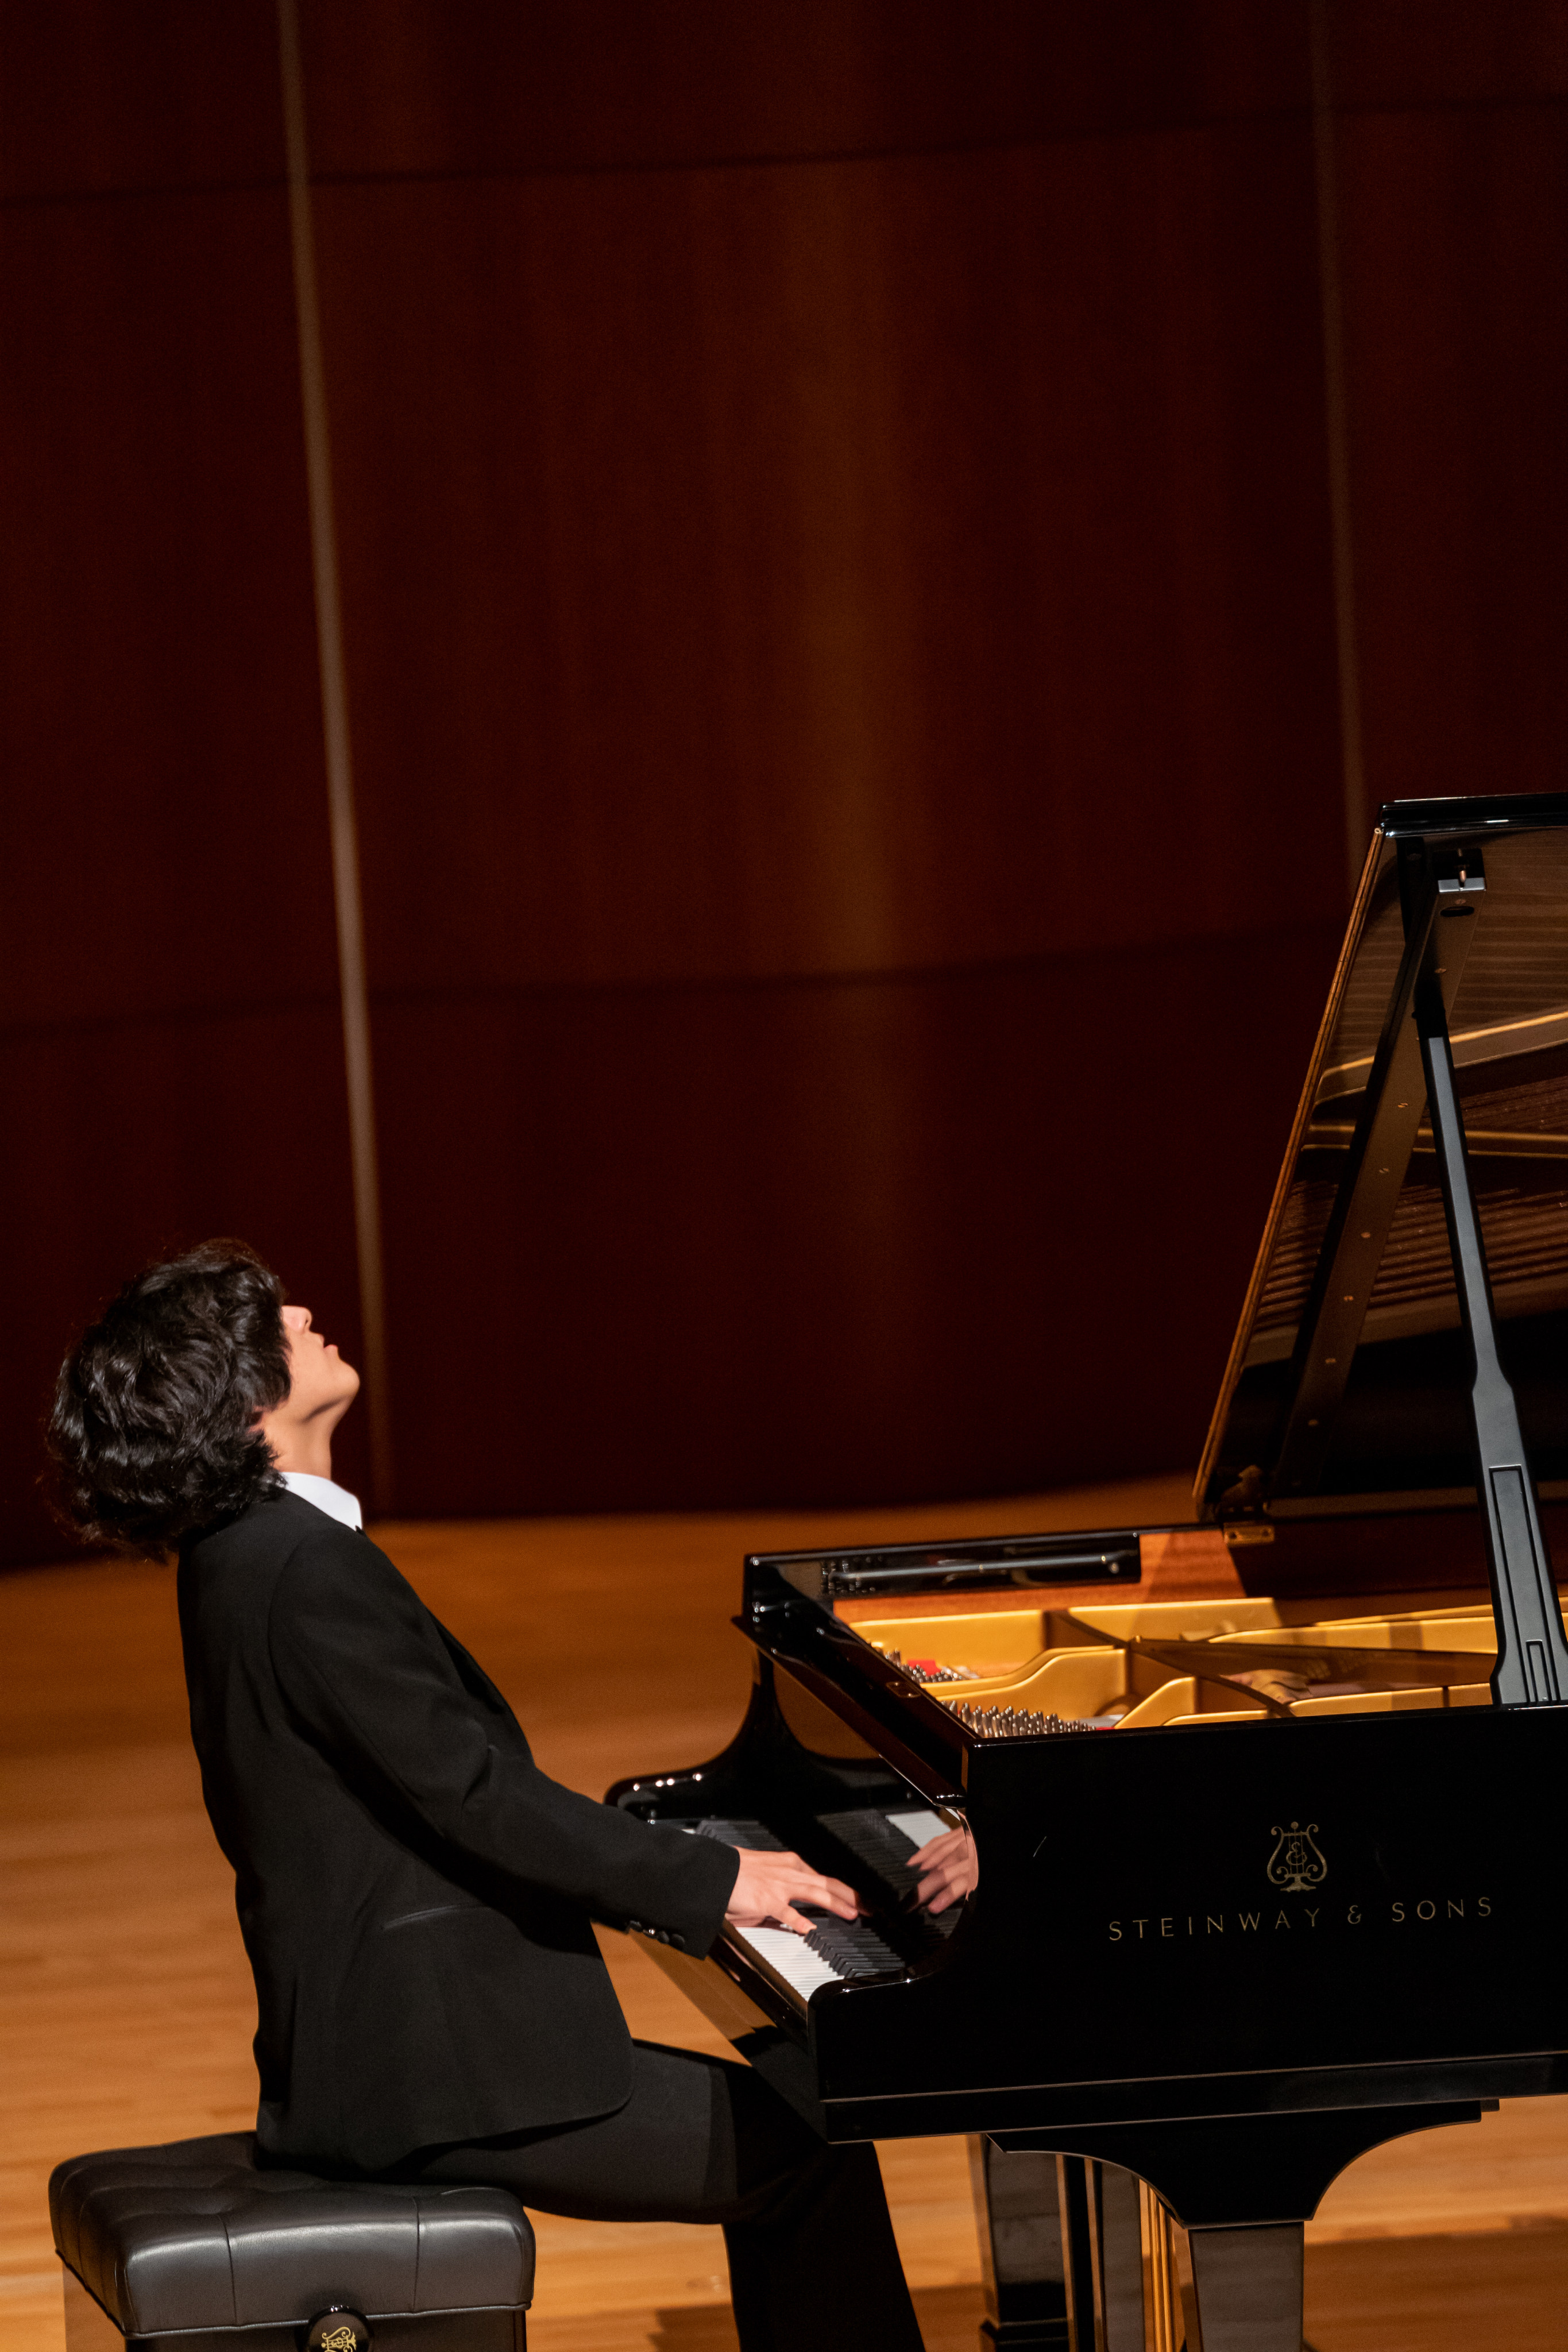 The 18-year-old South Korean pianist Yunchan Lim during his recital of pieces by Brahms, Mendelssohn and Liszt at the University of Hong Kong on November 11, 2022. Photo: Kurt Chan @ HKU Muse 